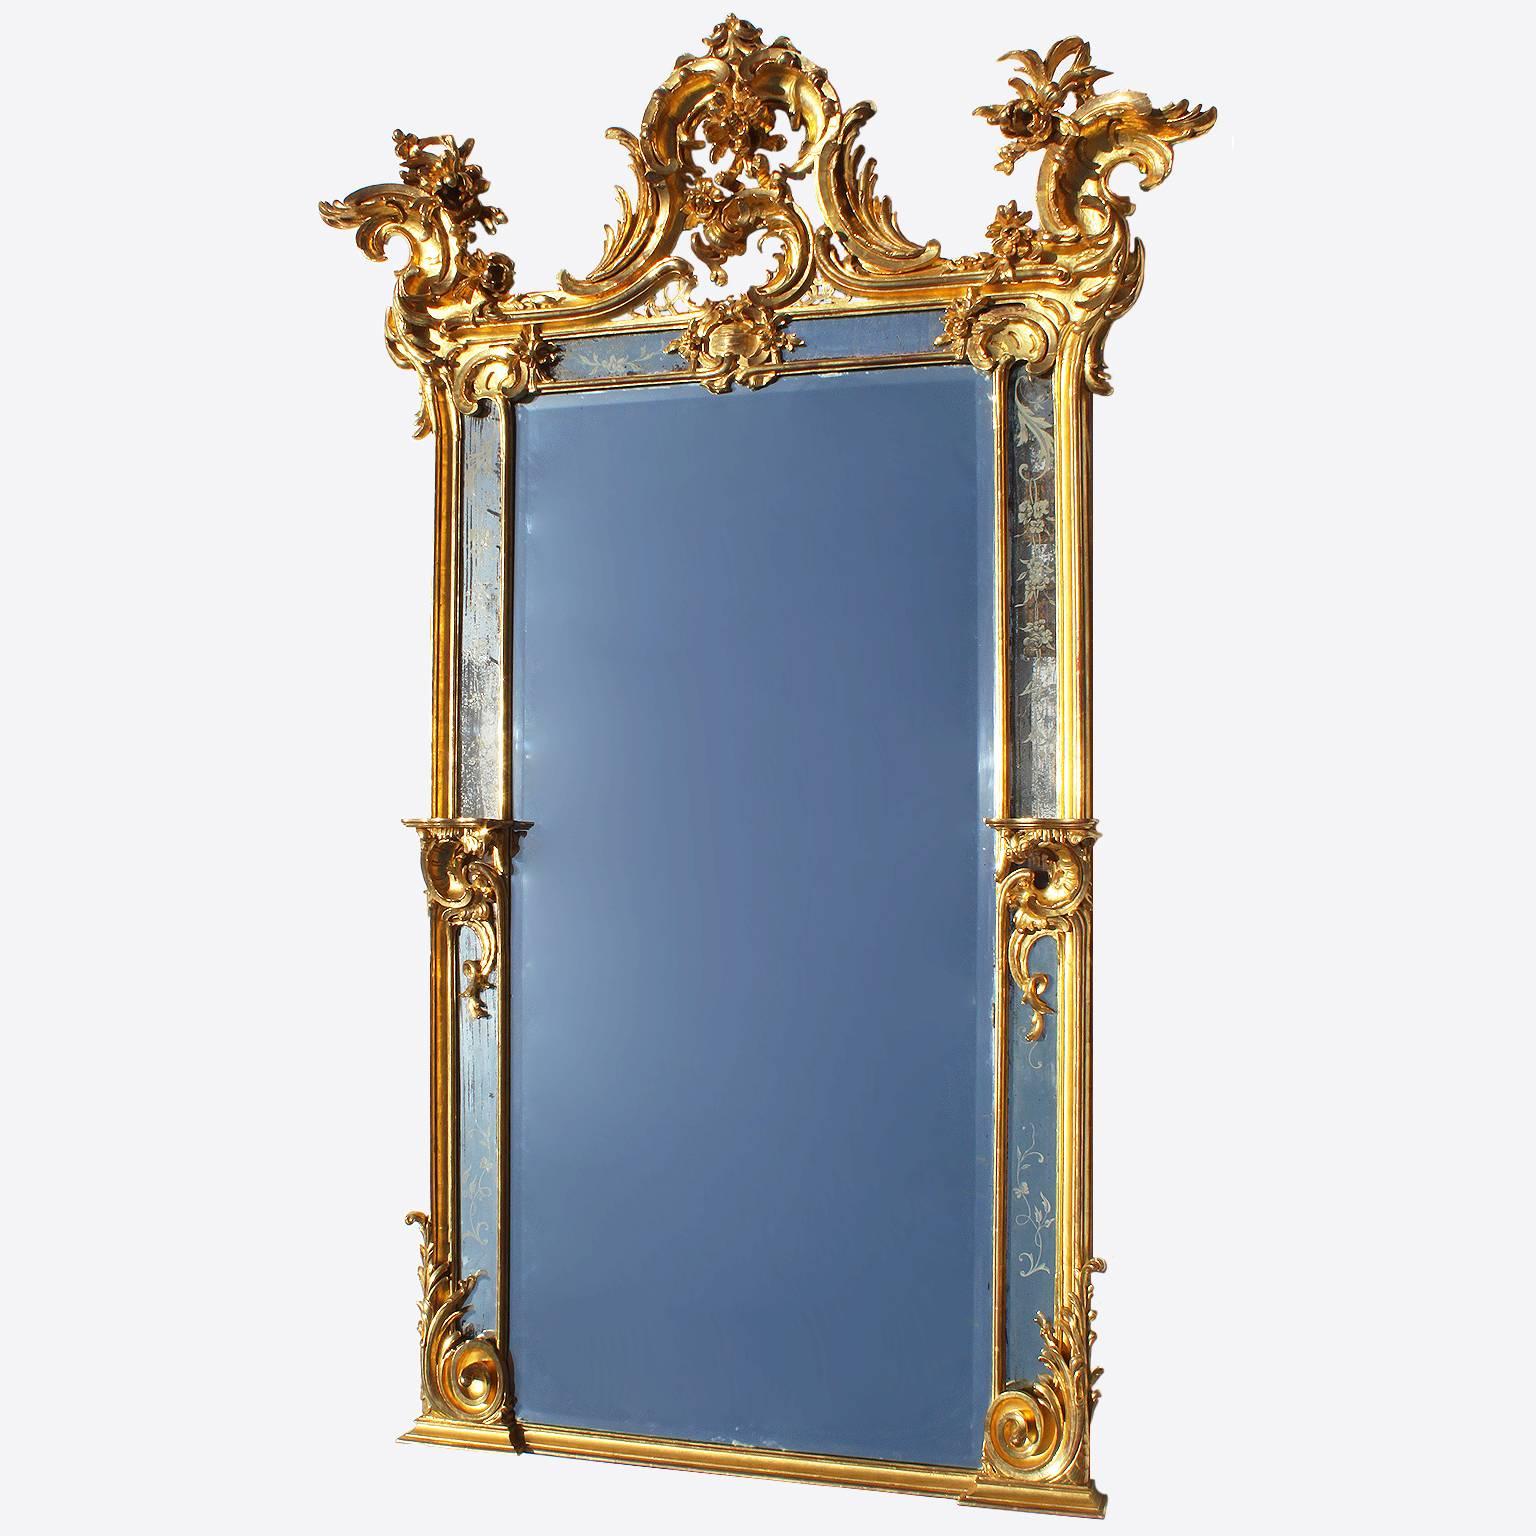 Rococo Revival Very Fine Pair of French 19th Century Rococo Style Giltwood Carved Pier Mirrors For Sale